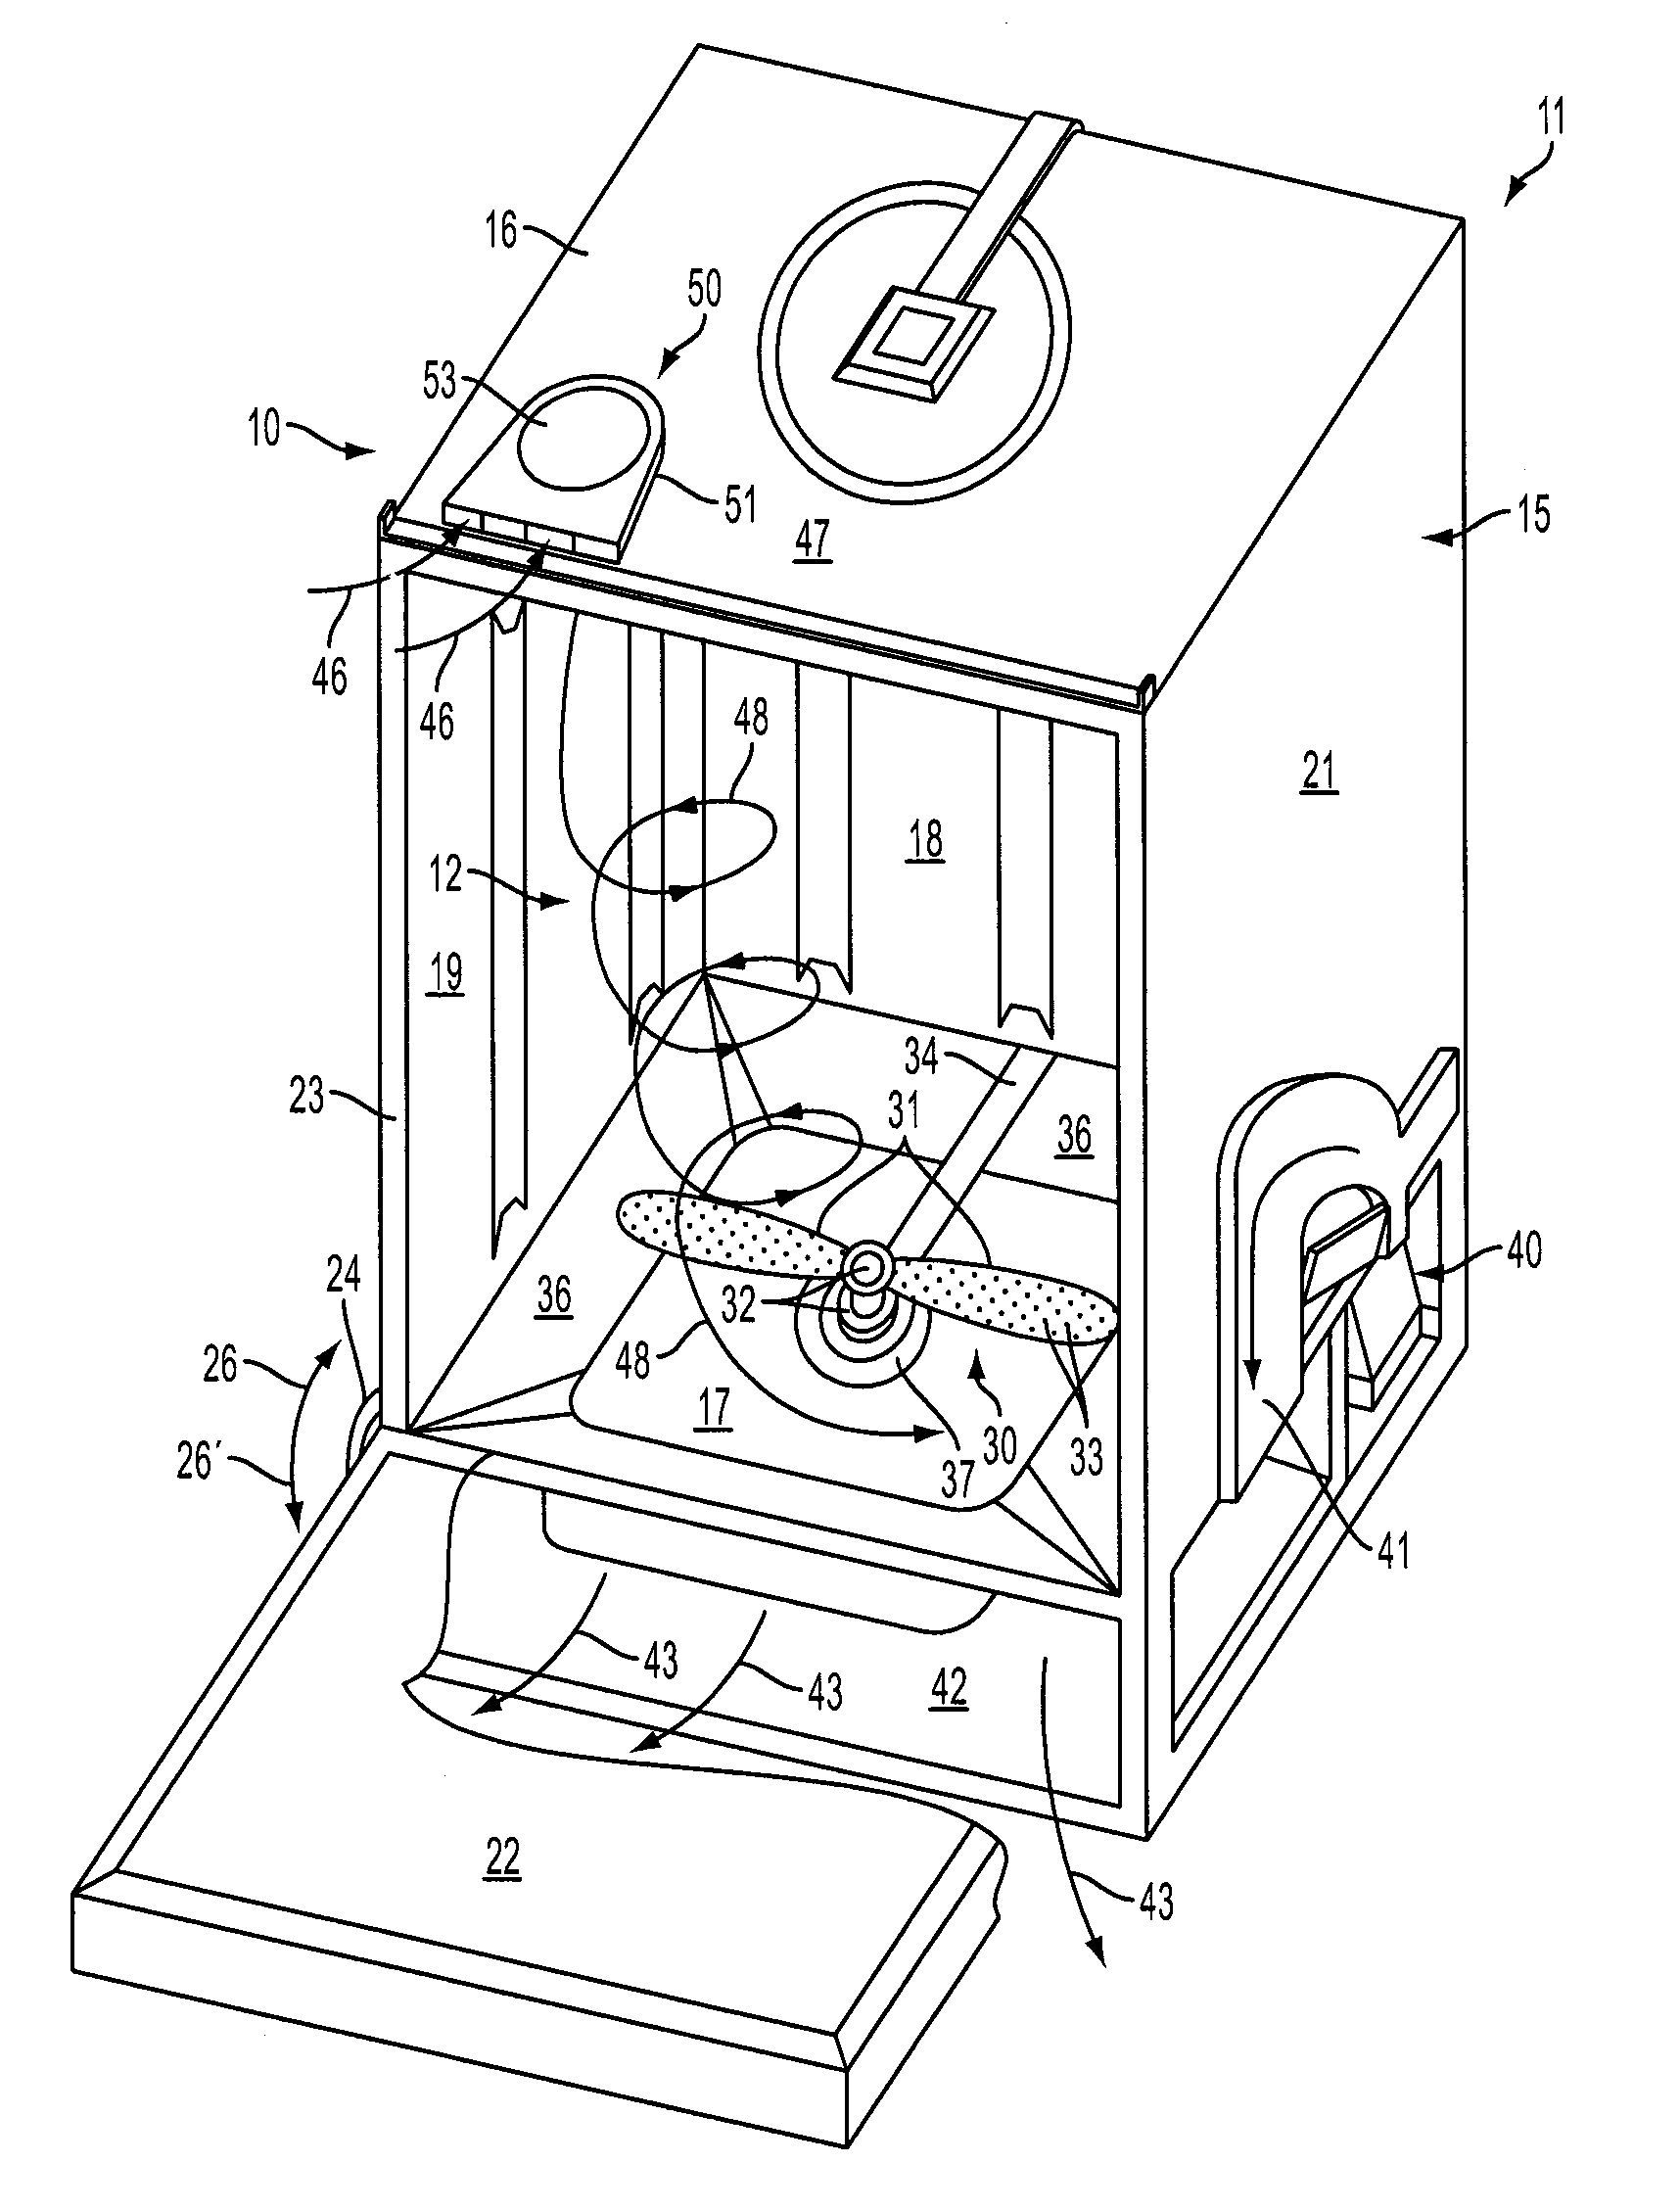 Drying system for a dishwasher